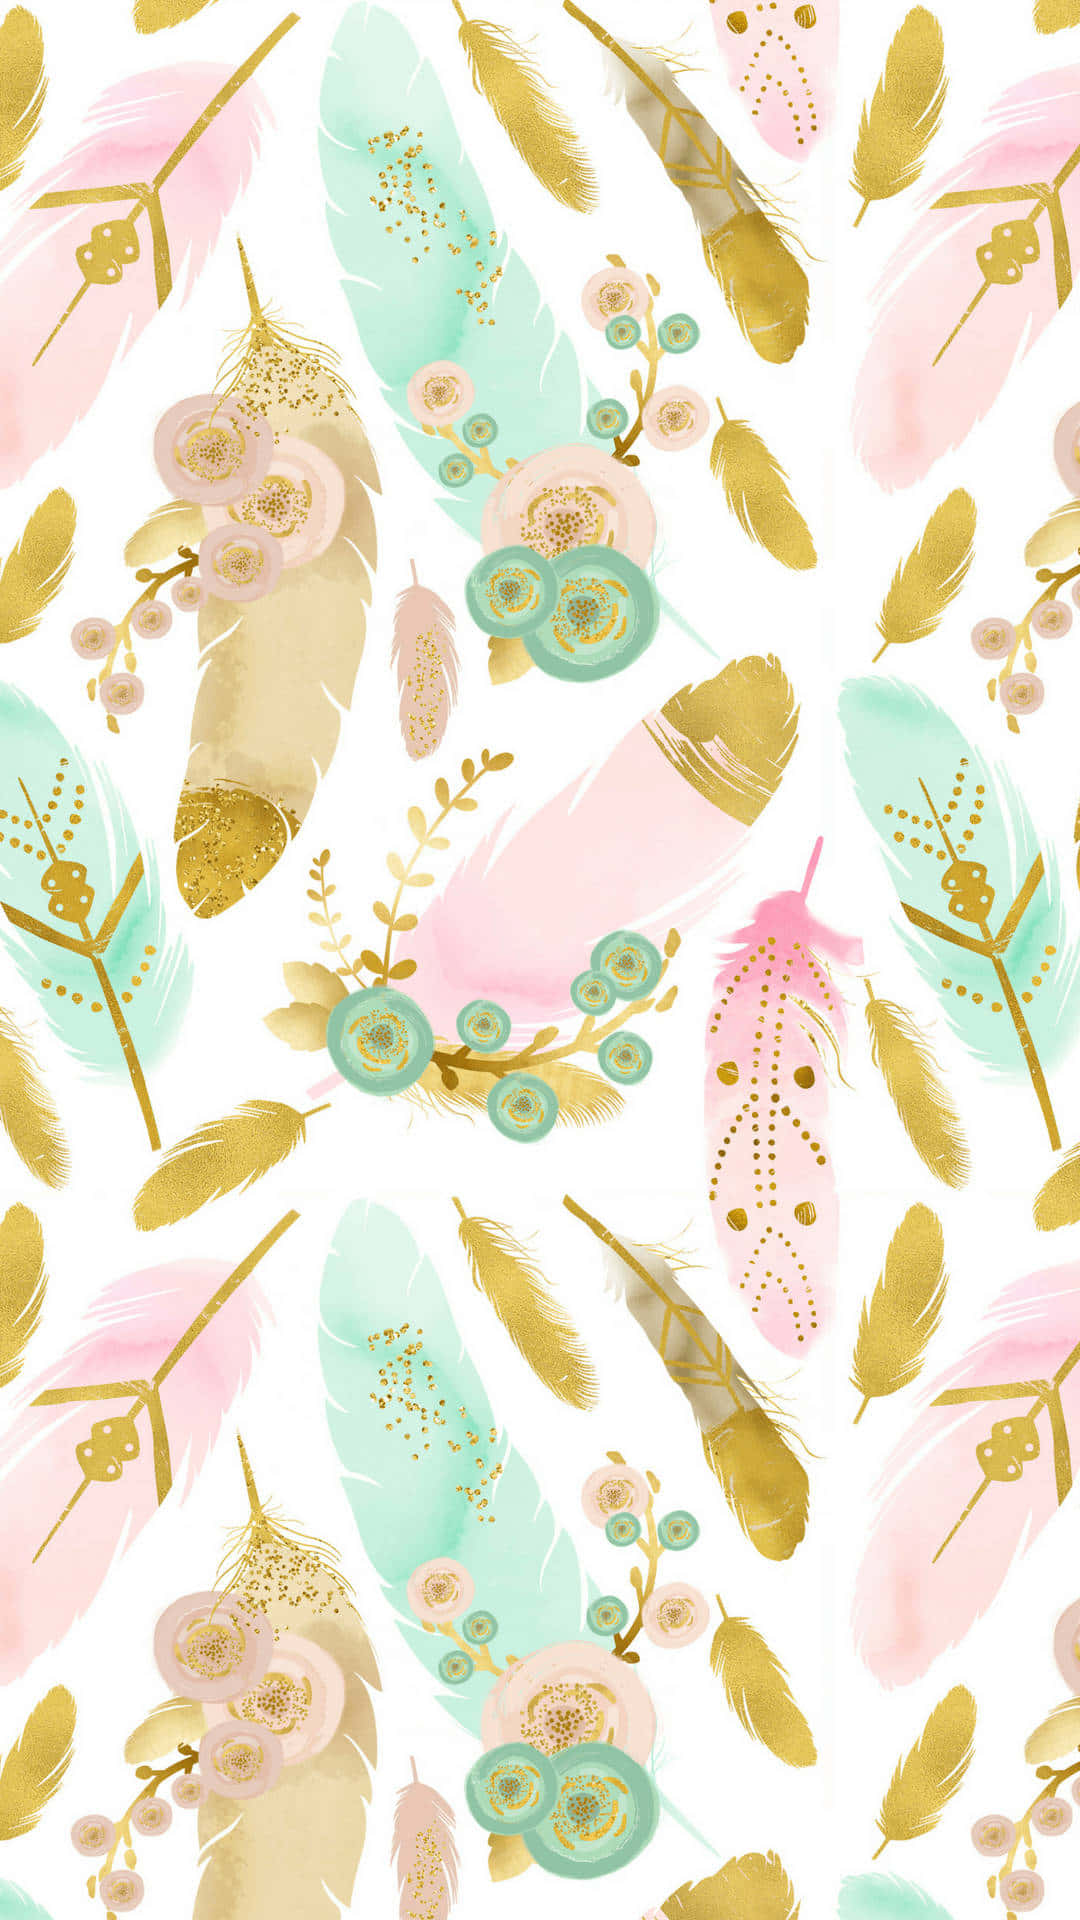 A Pattern With Feathers And Flowers On A White Background Wallpaper